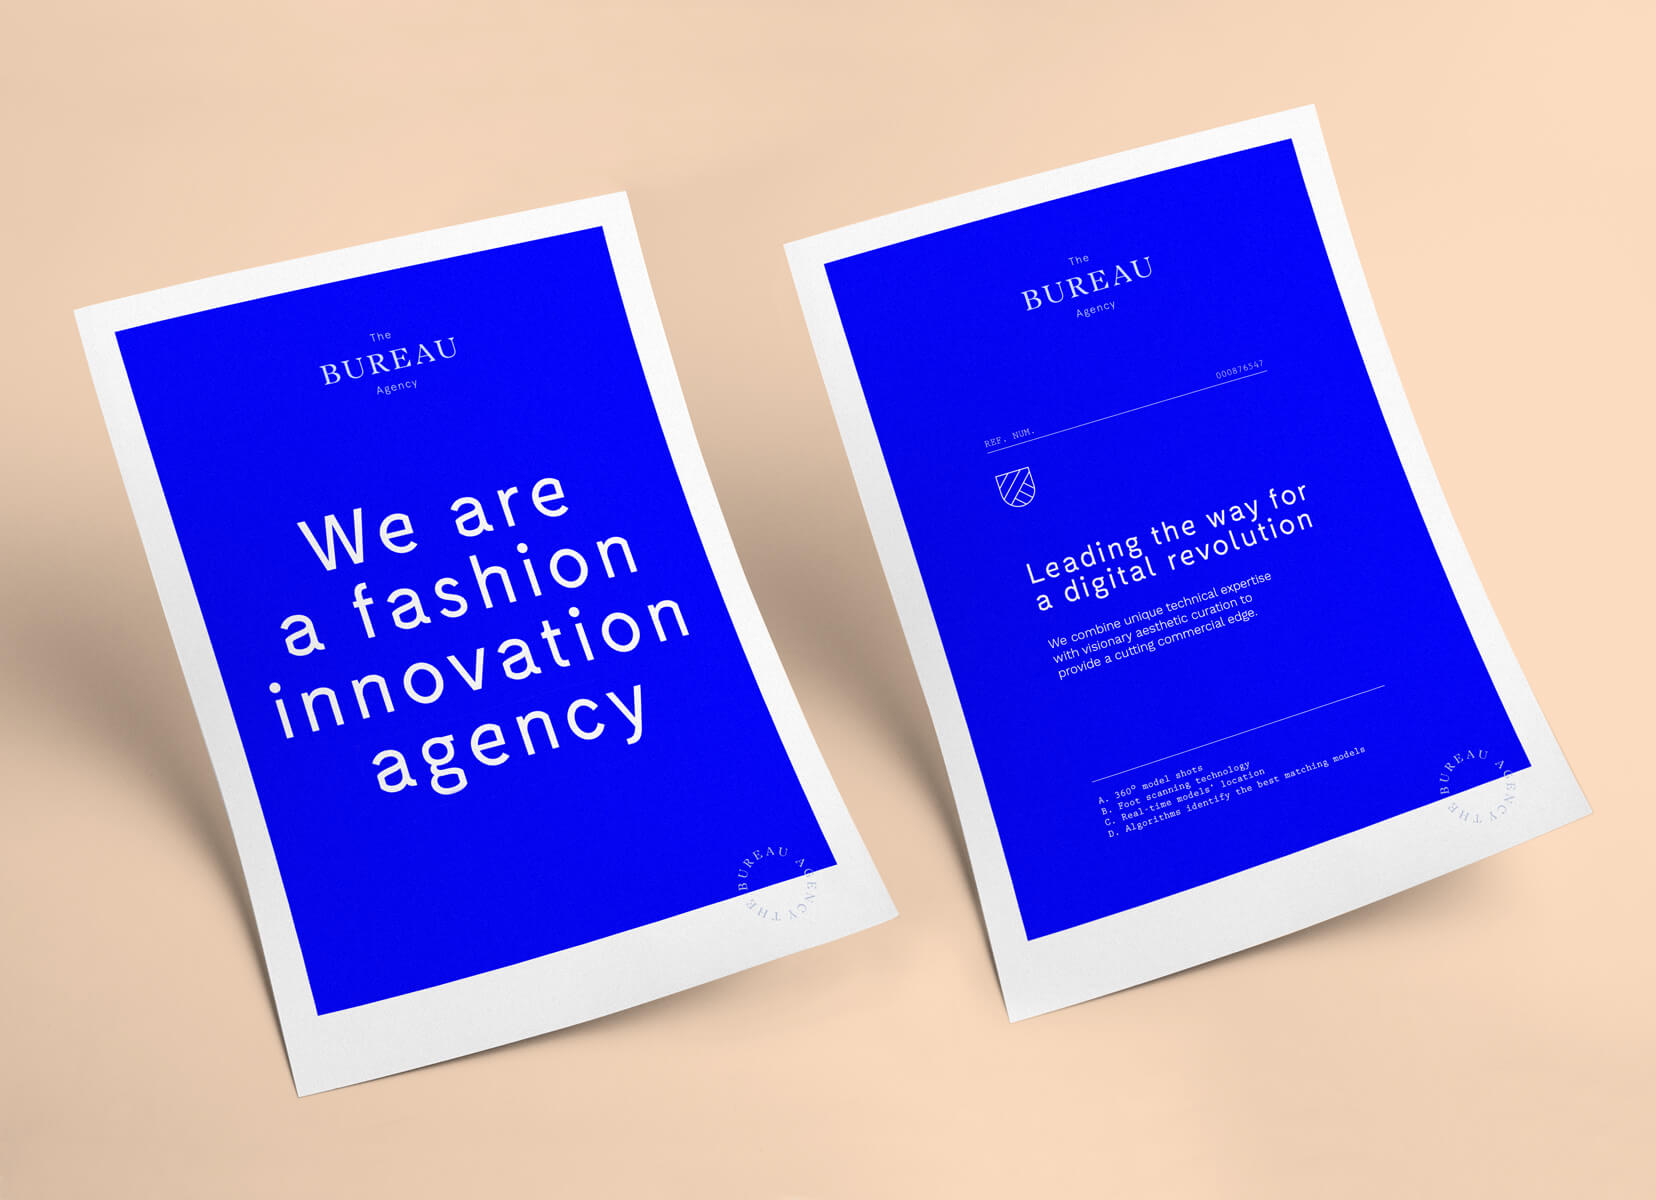 Two branded paper sheets featuring the brand expression We are a fashion innovation agency and some additional messaging